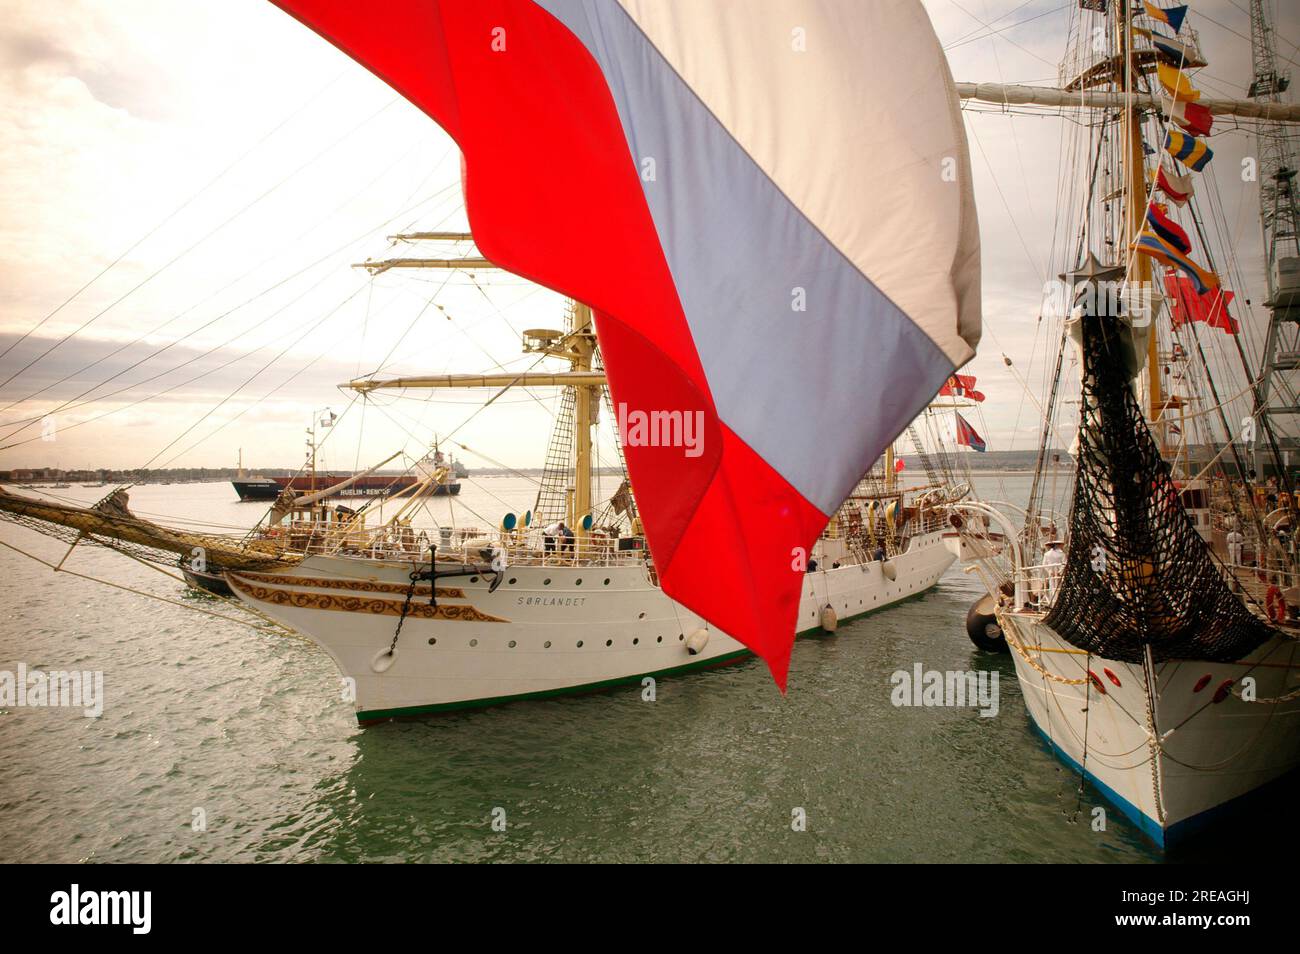 AJAXNETPHOTO. 3RD JULY, 2005. PORTSMOUTH, ENGLAND - INTERNATIONAL FESTIVAL OF THE SEA 2005 - MORE THAN 35 TALL SHIPS TOOK PART IN IFOS 2005. HERE, THE NORWEGIAN SAIL TRAINING VESSEL SORLANDET PREPARES TO SAIL FROM ALONGSIDE THE MONTENEGRAN TALL SHIP JADRAN. PHOTO:JONATHAN EASTLAND/AJAX REF:R50307 440 Stock Photo